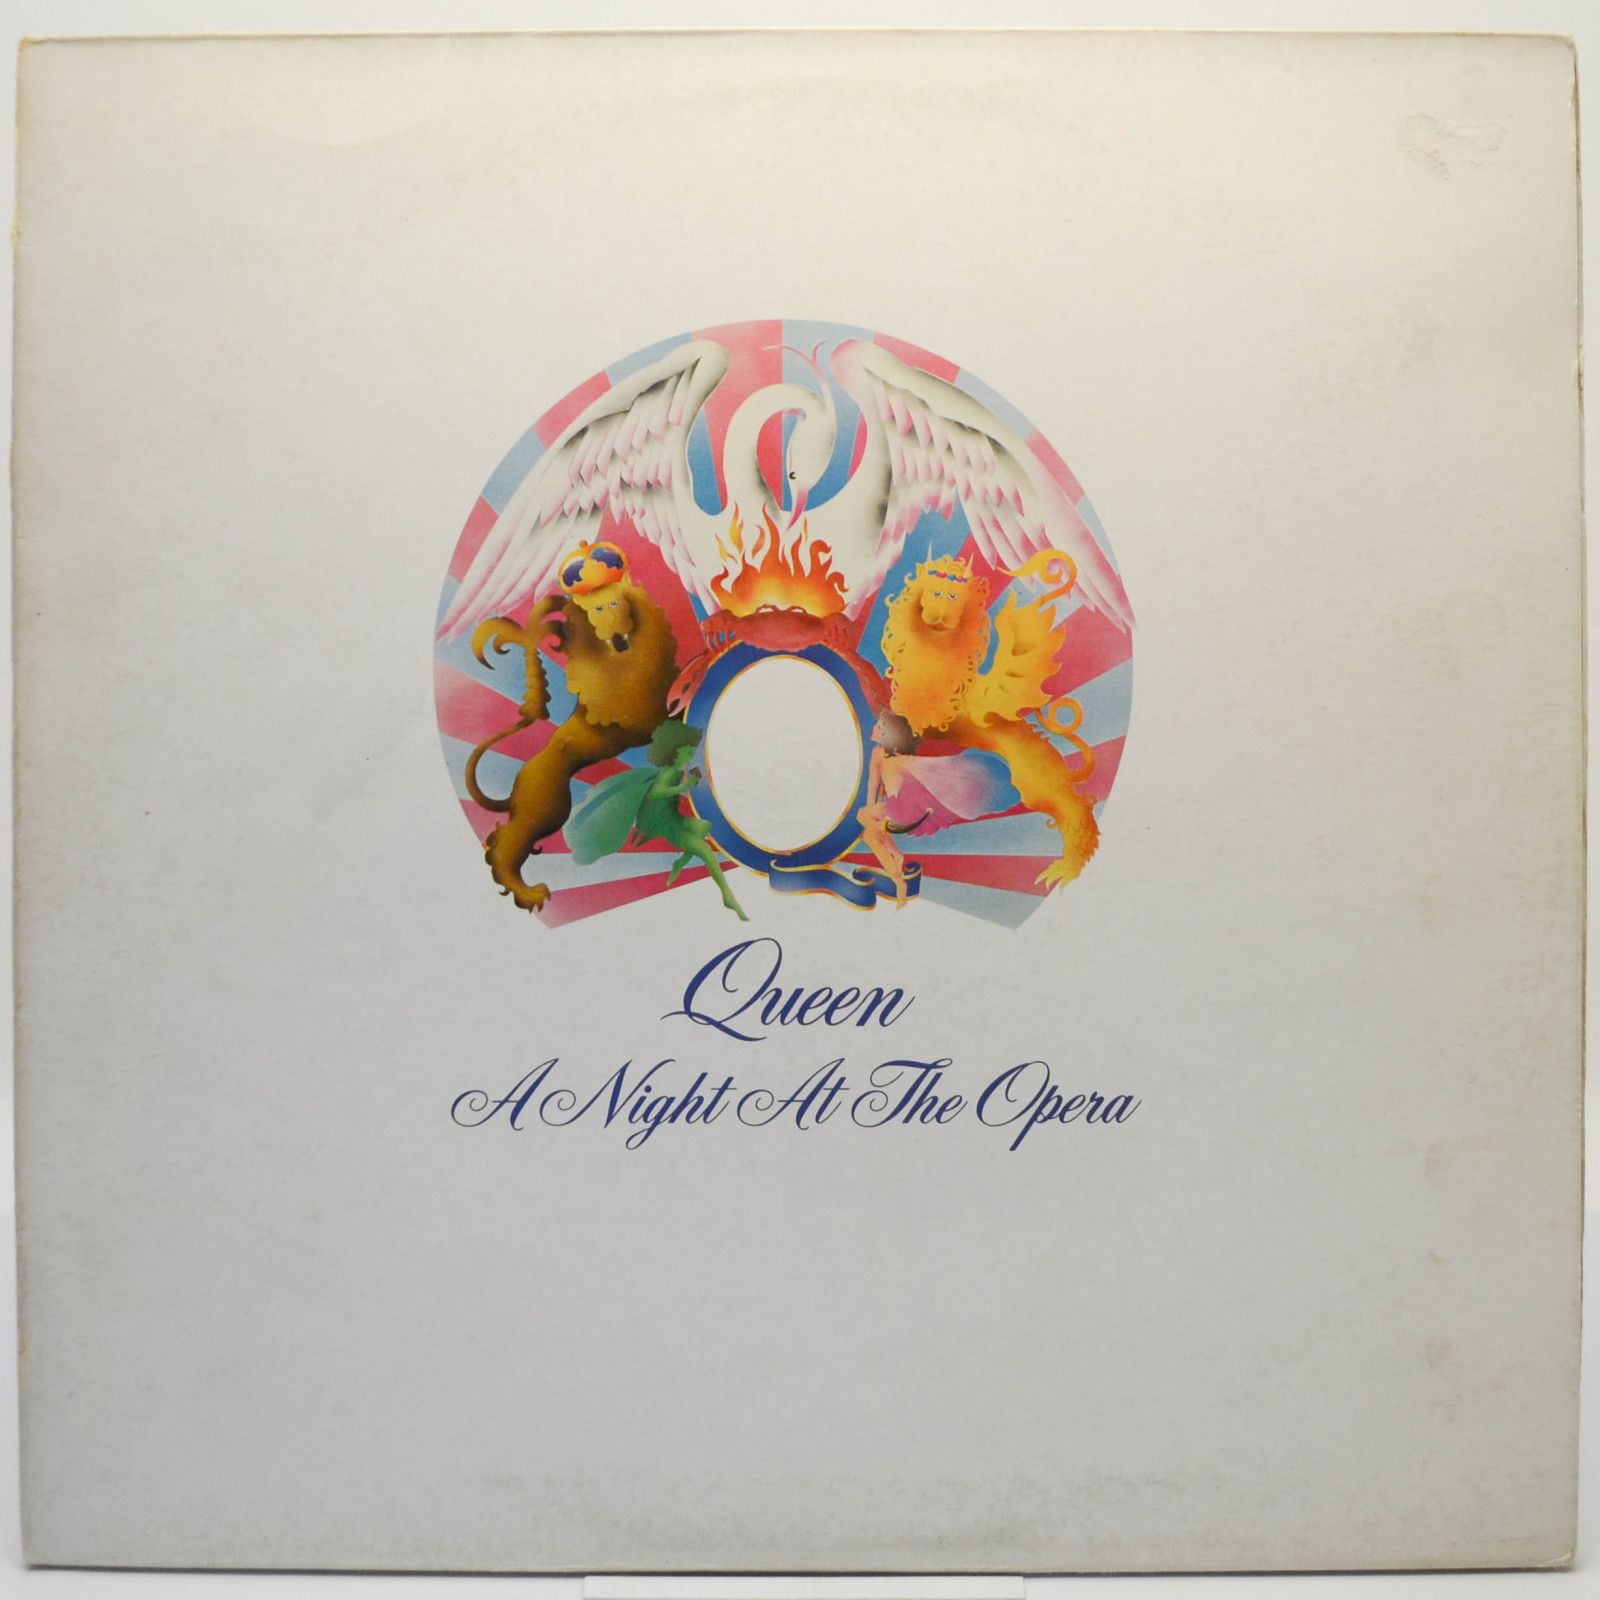 Queen — A Night At The Opera, 1975